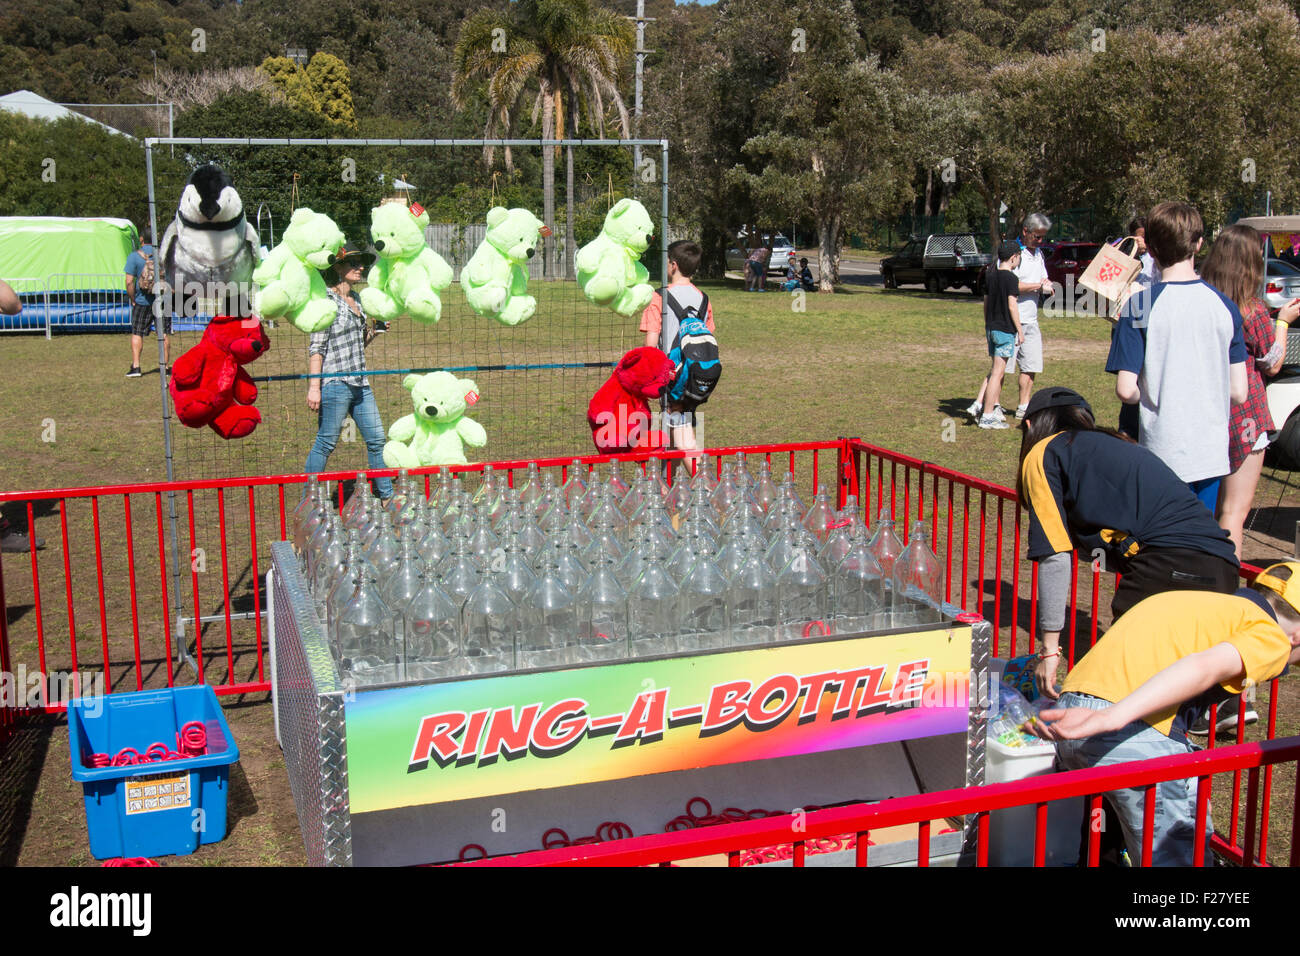 Ring a bottle at Sydney primary school hosts the local community fete fair to raise funds for the school,Avalon,Sydney,Australia Stock Photo